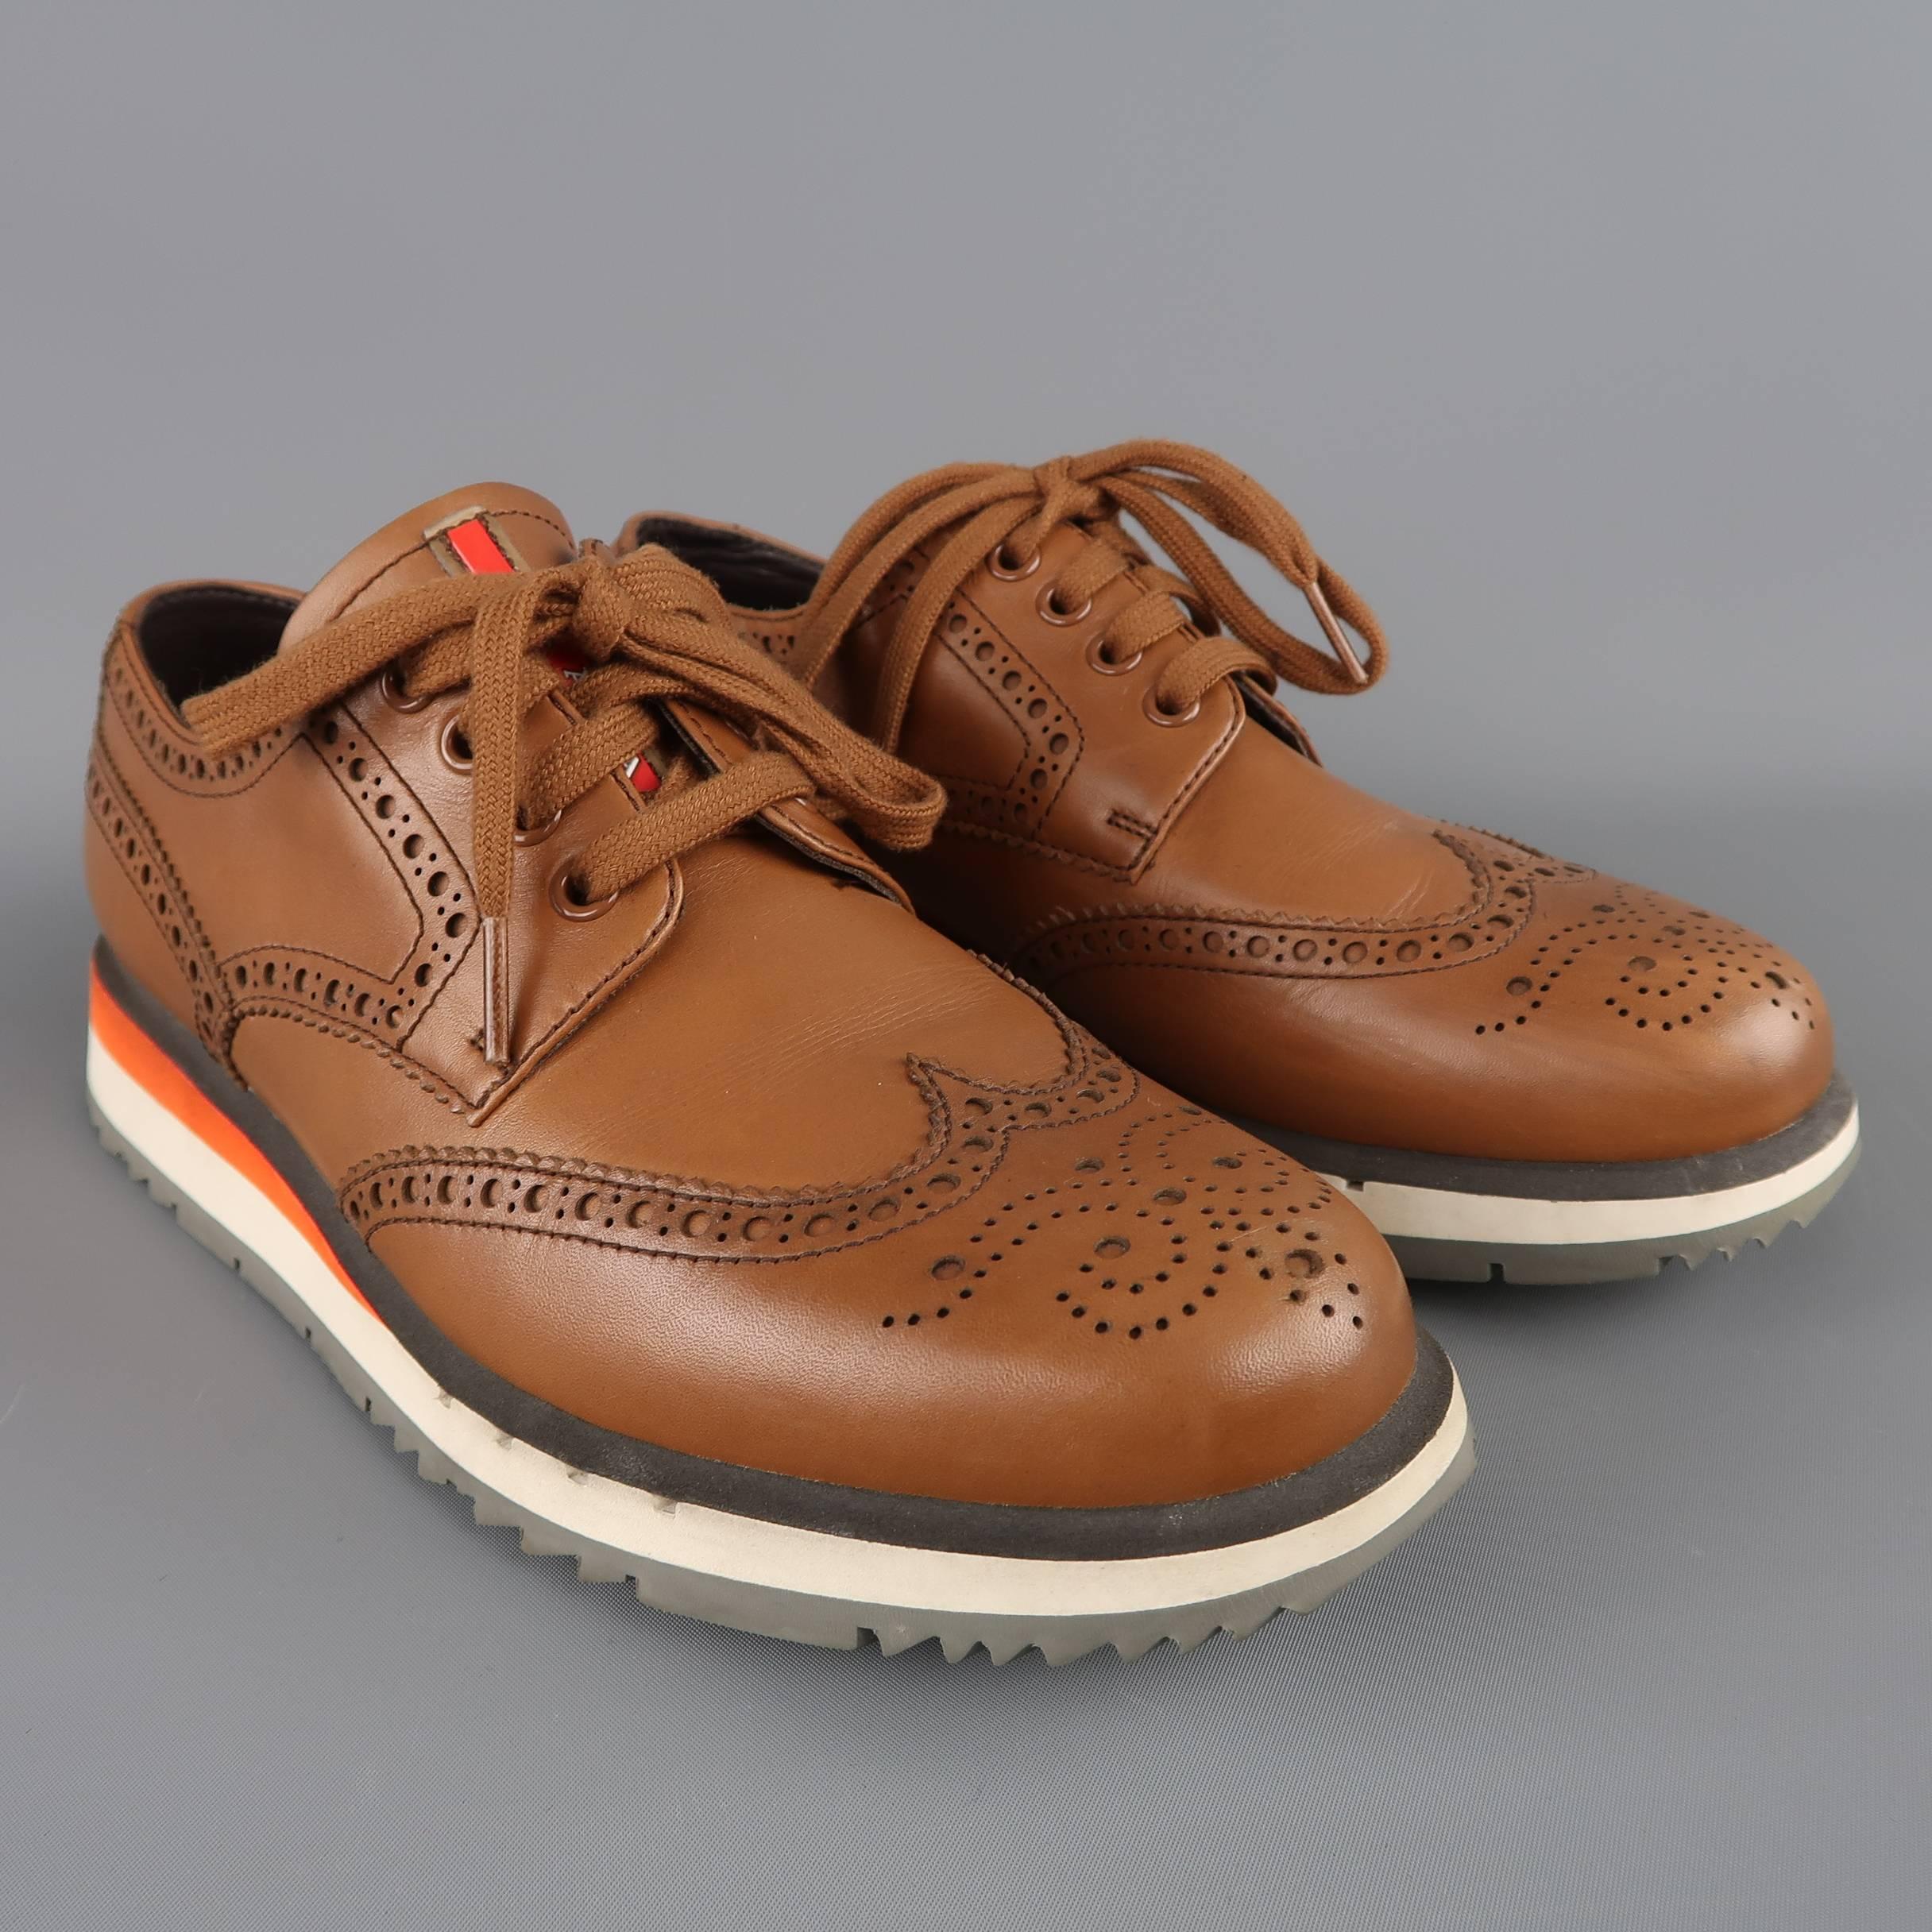 PRADA lace ups come in a rich tan leather with a rounded wingtip toe, red logo tongue, perforated brogue details throughout, and orange and white athletic platform sole. Wear throughout. As-is.
 
Fair Pre-Owned Condition.
Marked: UK 6
 
Outsole: